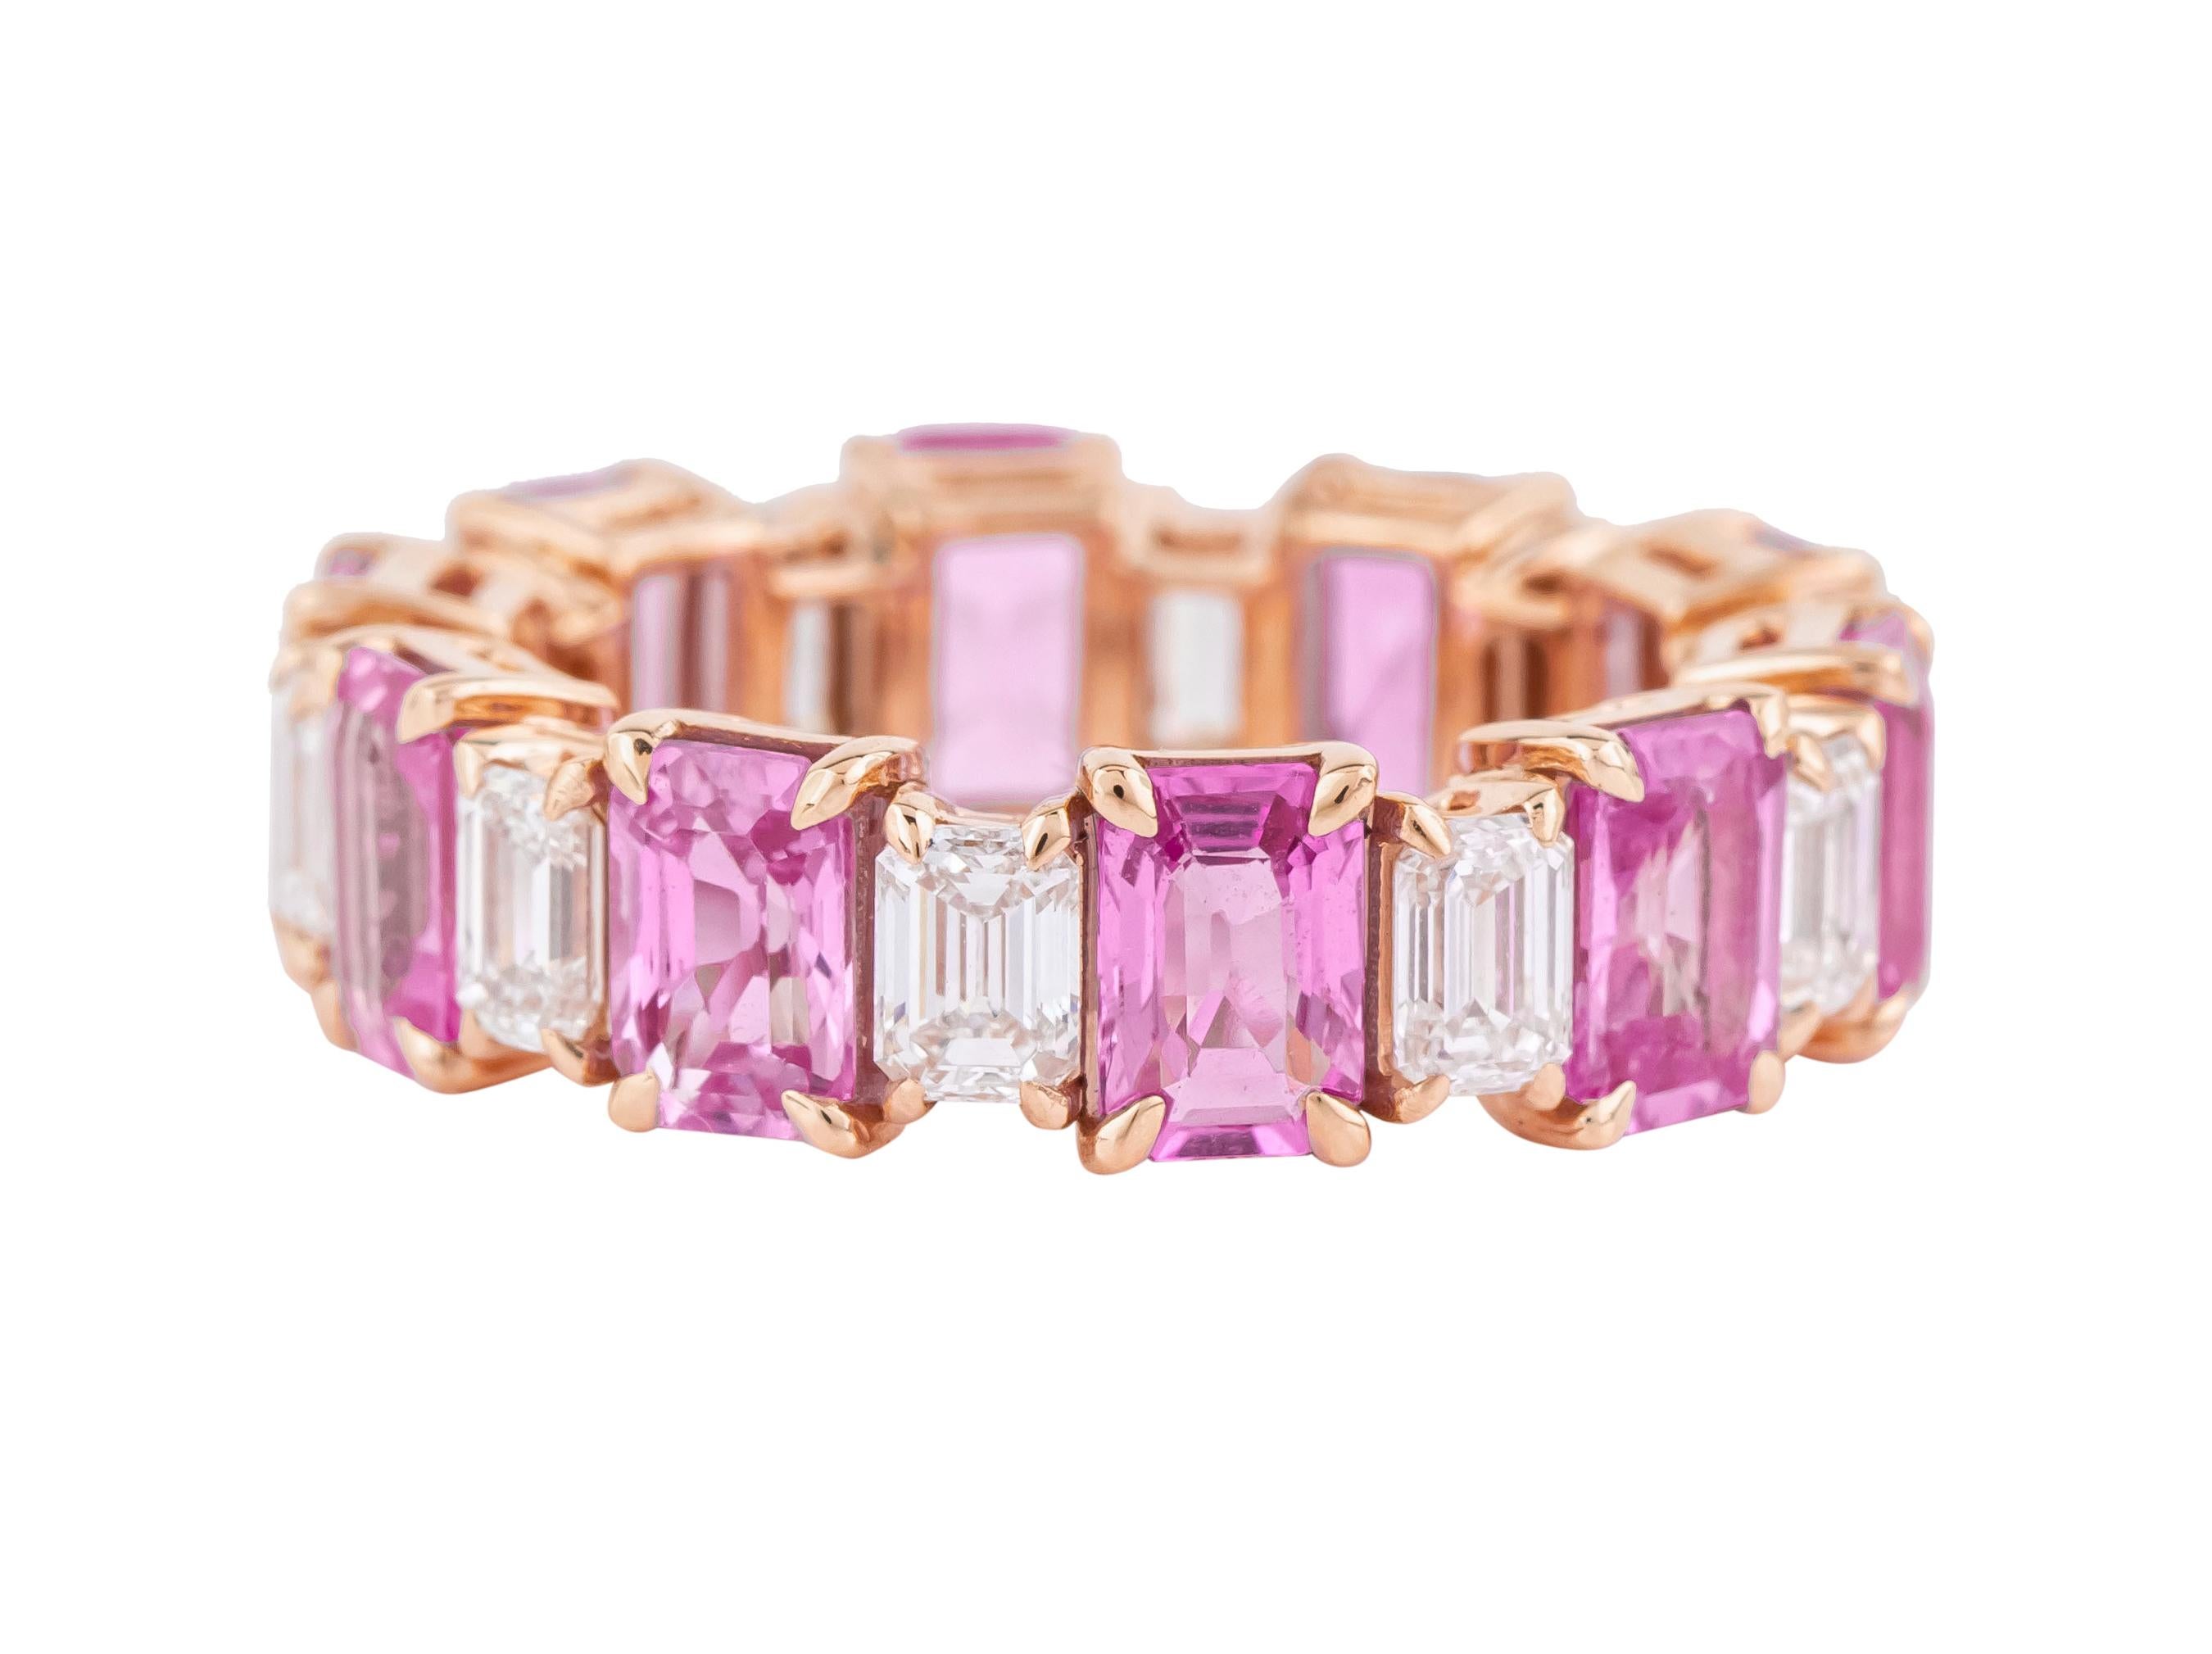 Emerald Cut 18 Karat Gold 8.81 Carat Diamond and Pink Sapphire Eternity Band Ring For Sale